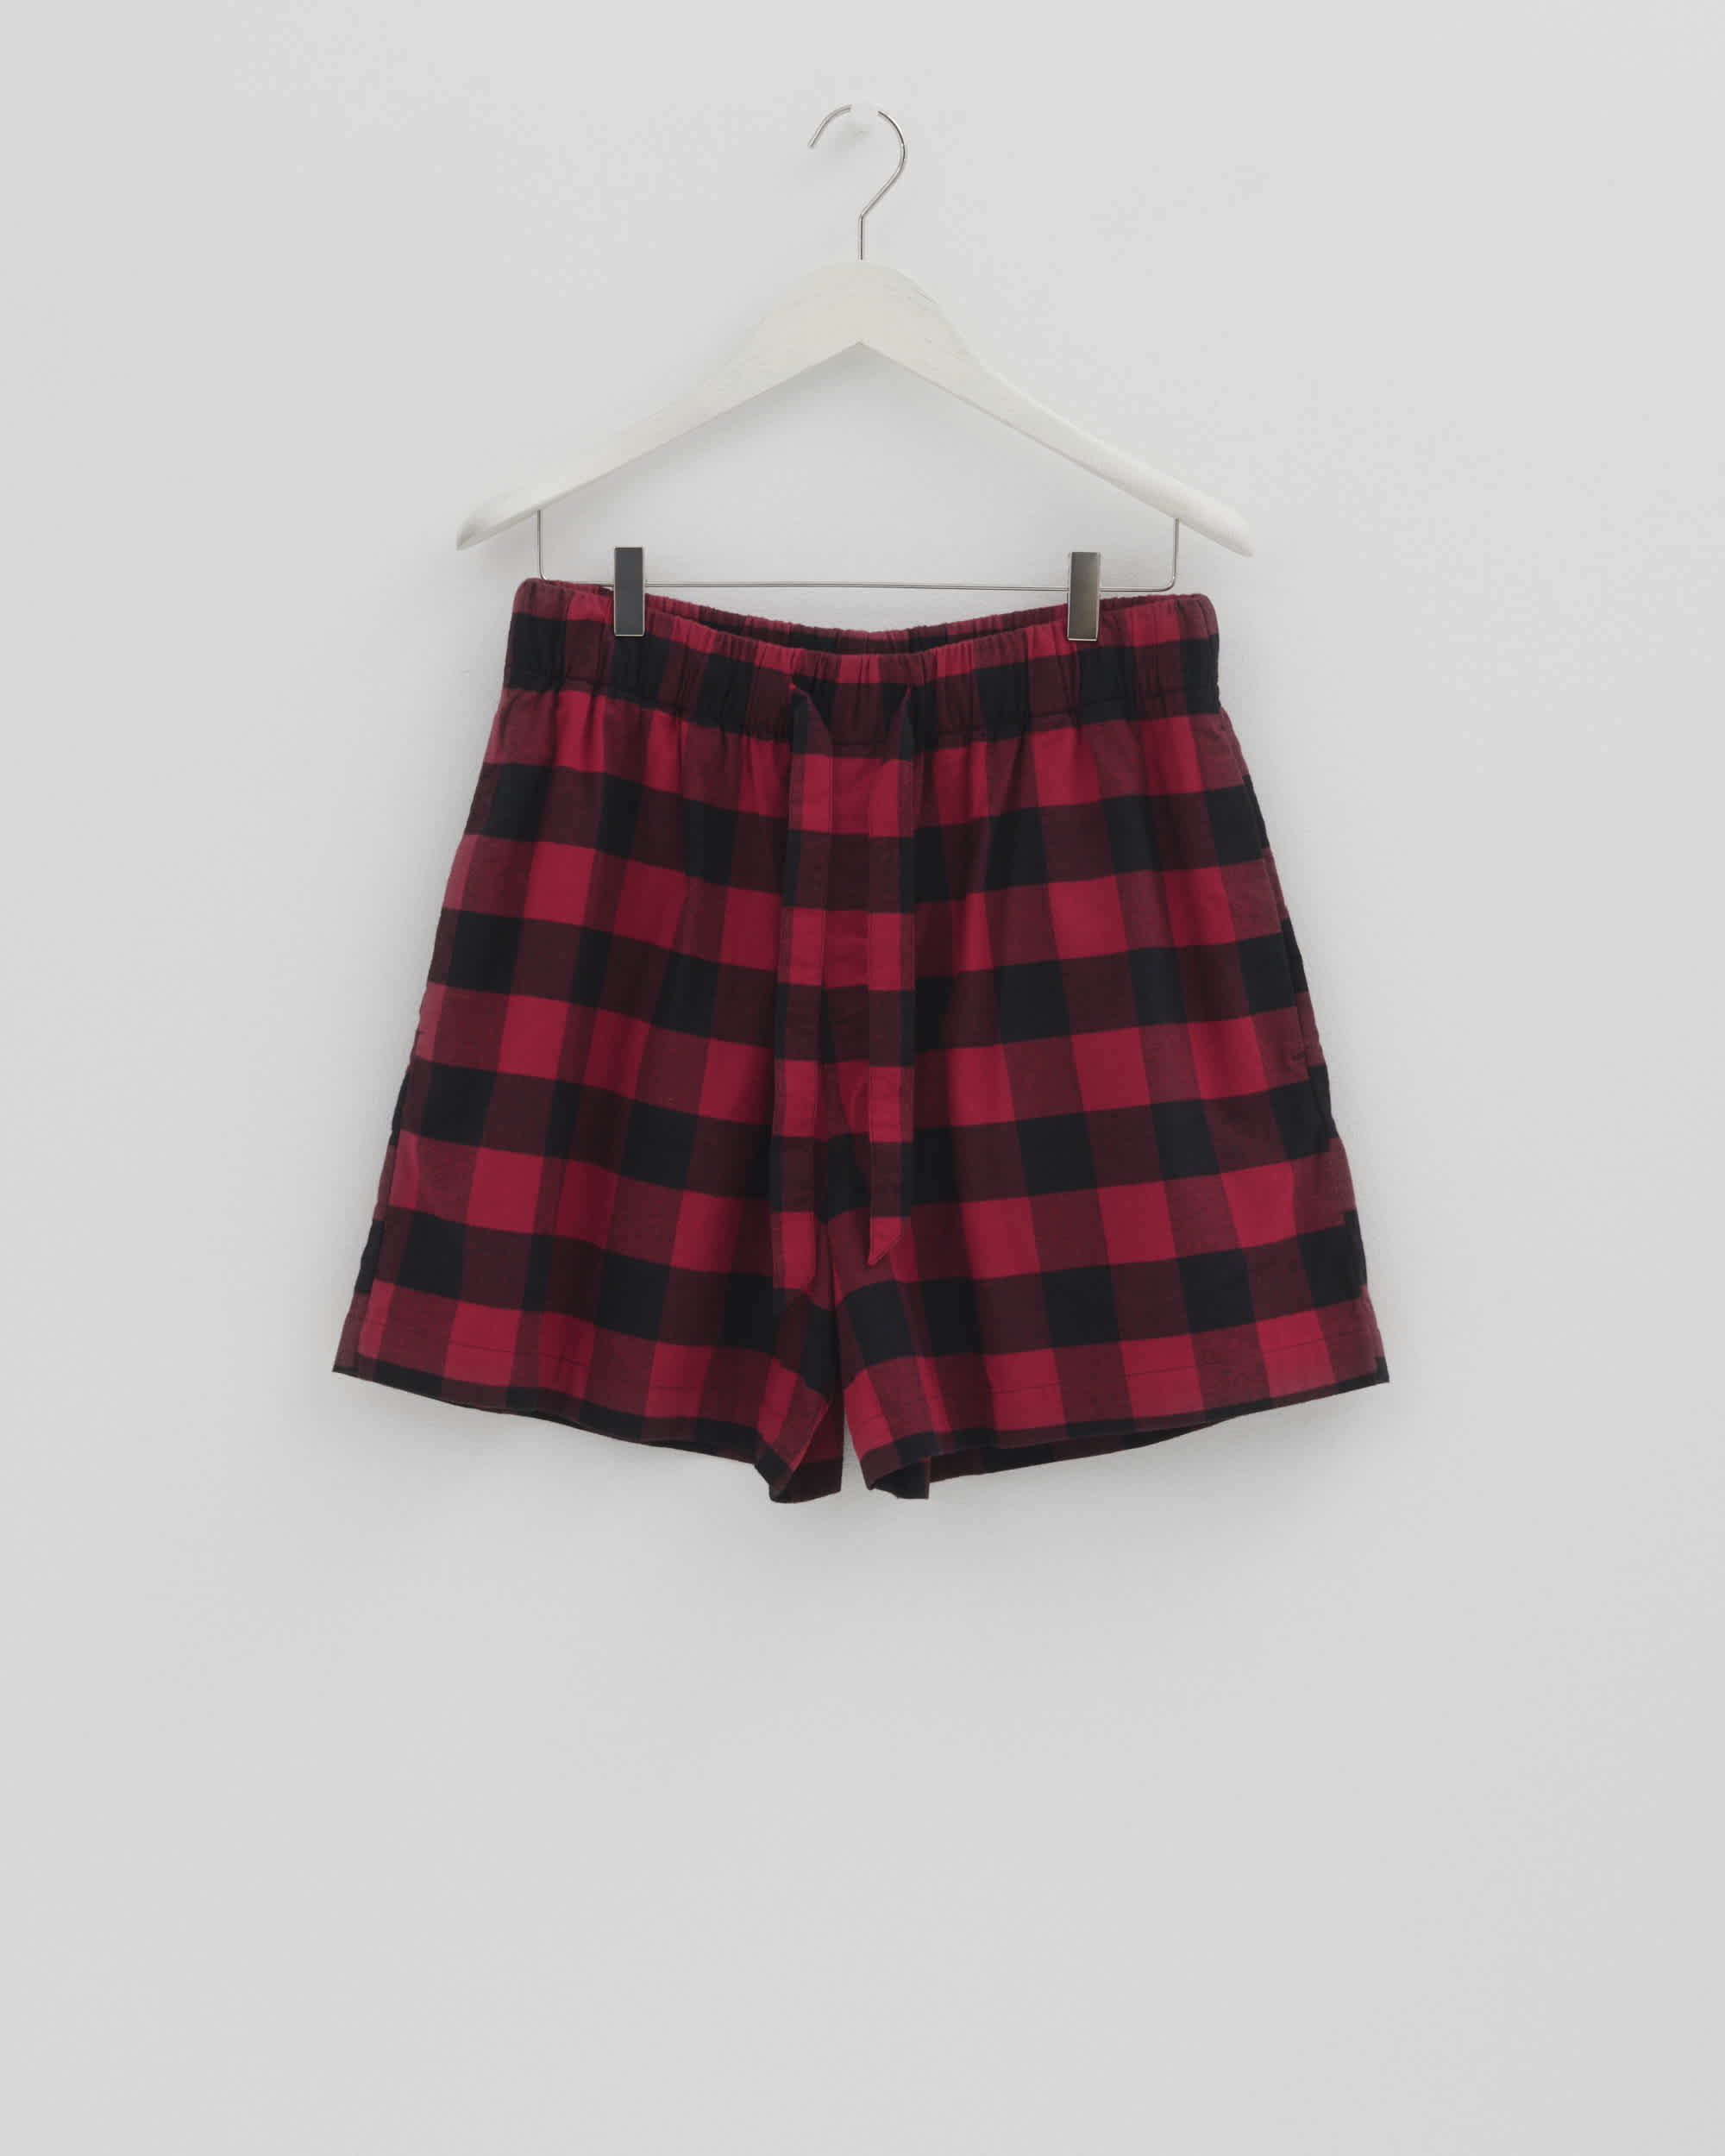 Flannel pyjamas – shorts – Red Gingham